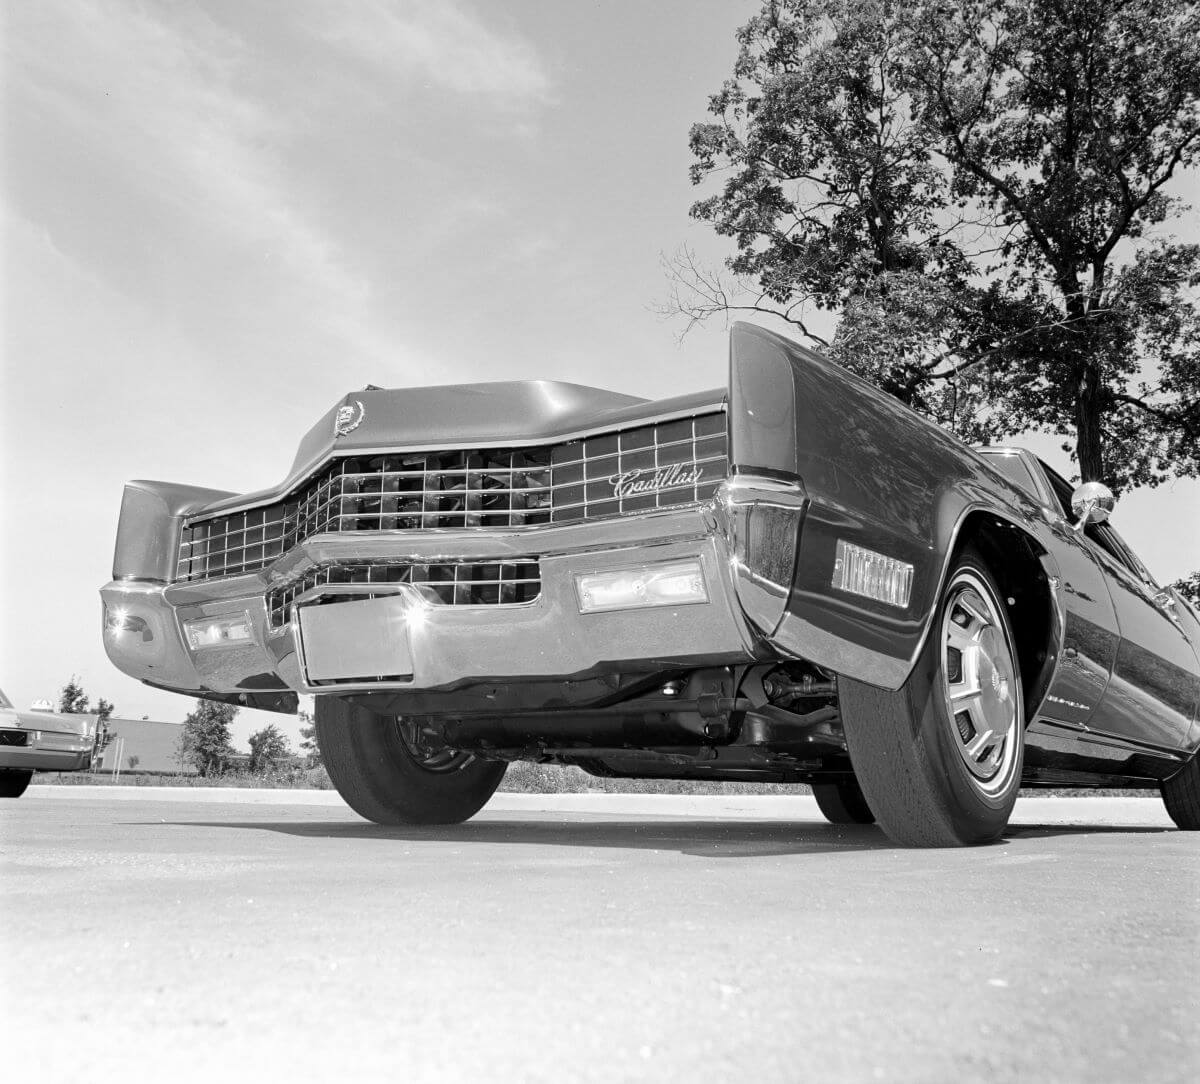 A black and white photo of a Cadillac Eldorado FWD model with an egg-crate grille from the 1967 Chevrolet lineup